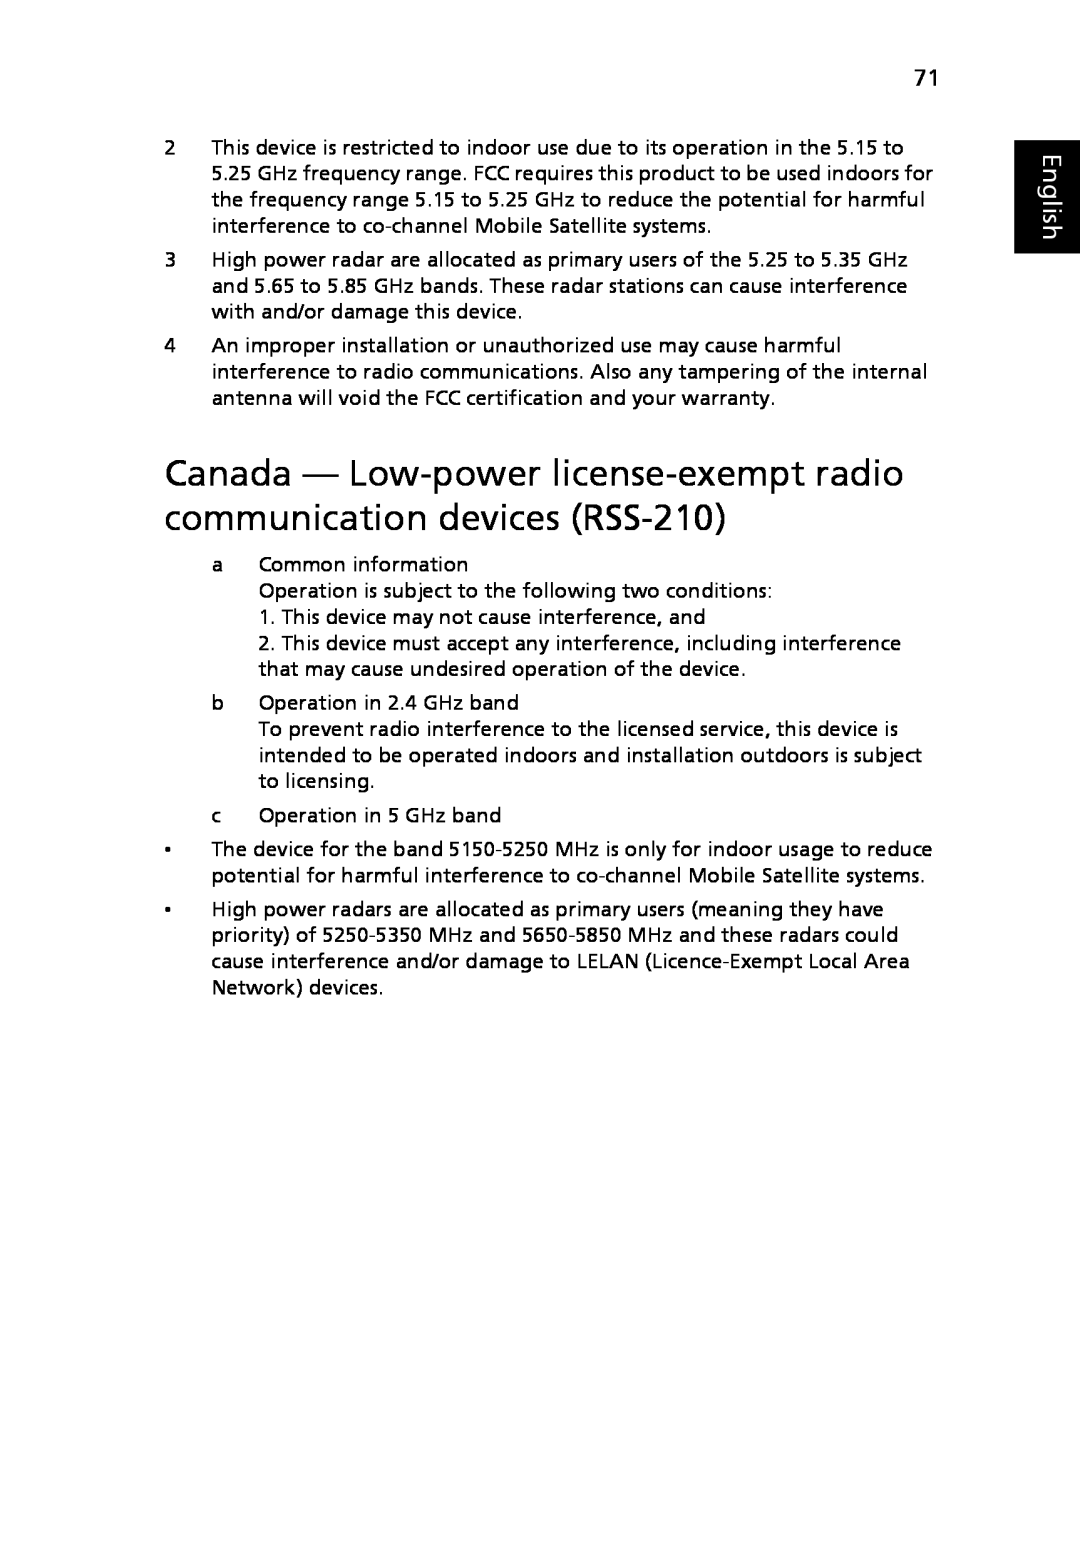 Acer 6492 Series, 6492G manual Canada - Low-power license-exempt radio communication devices RSS-210, English 